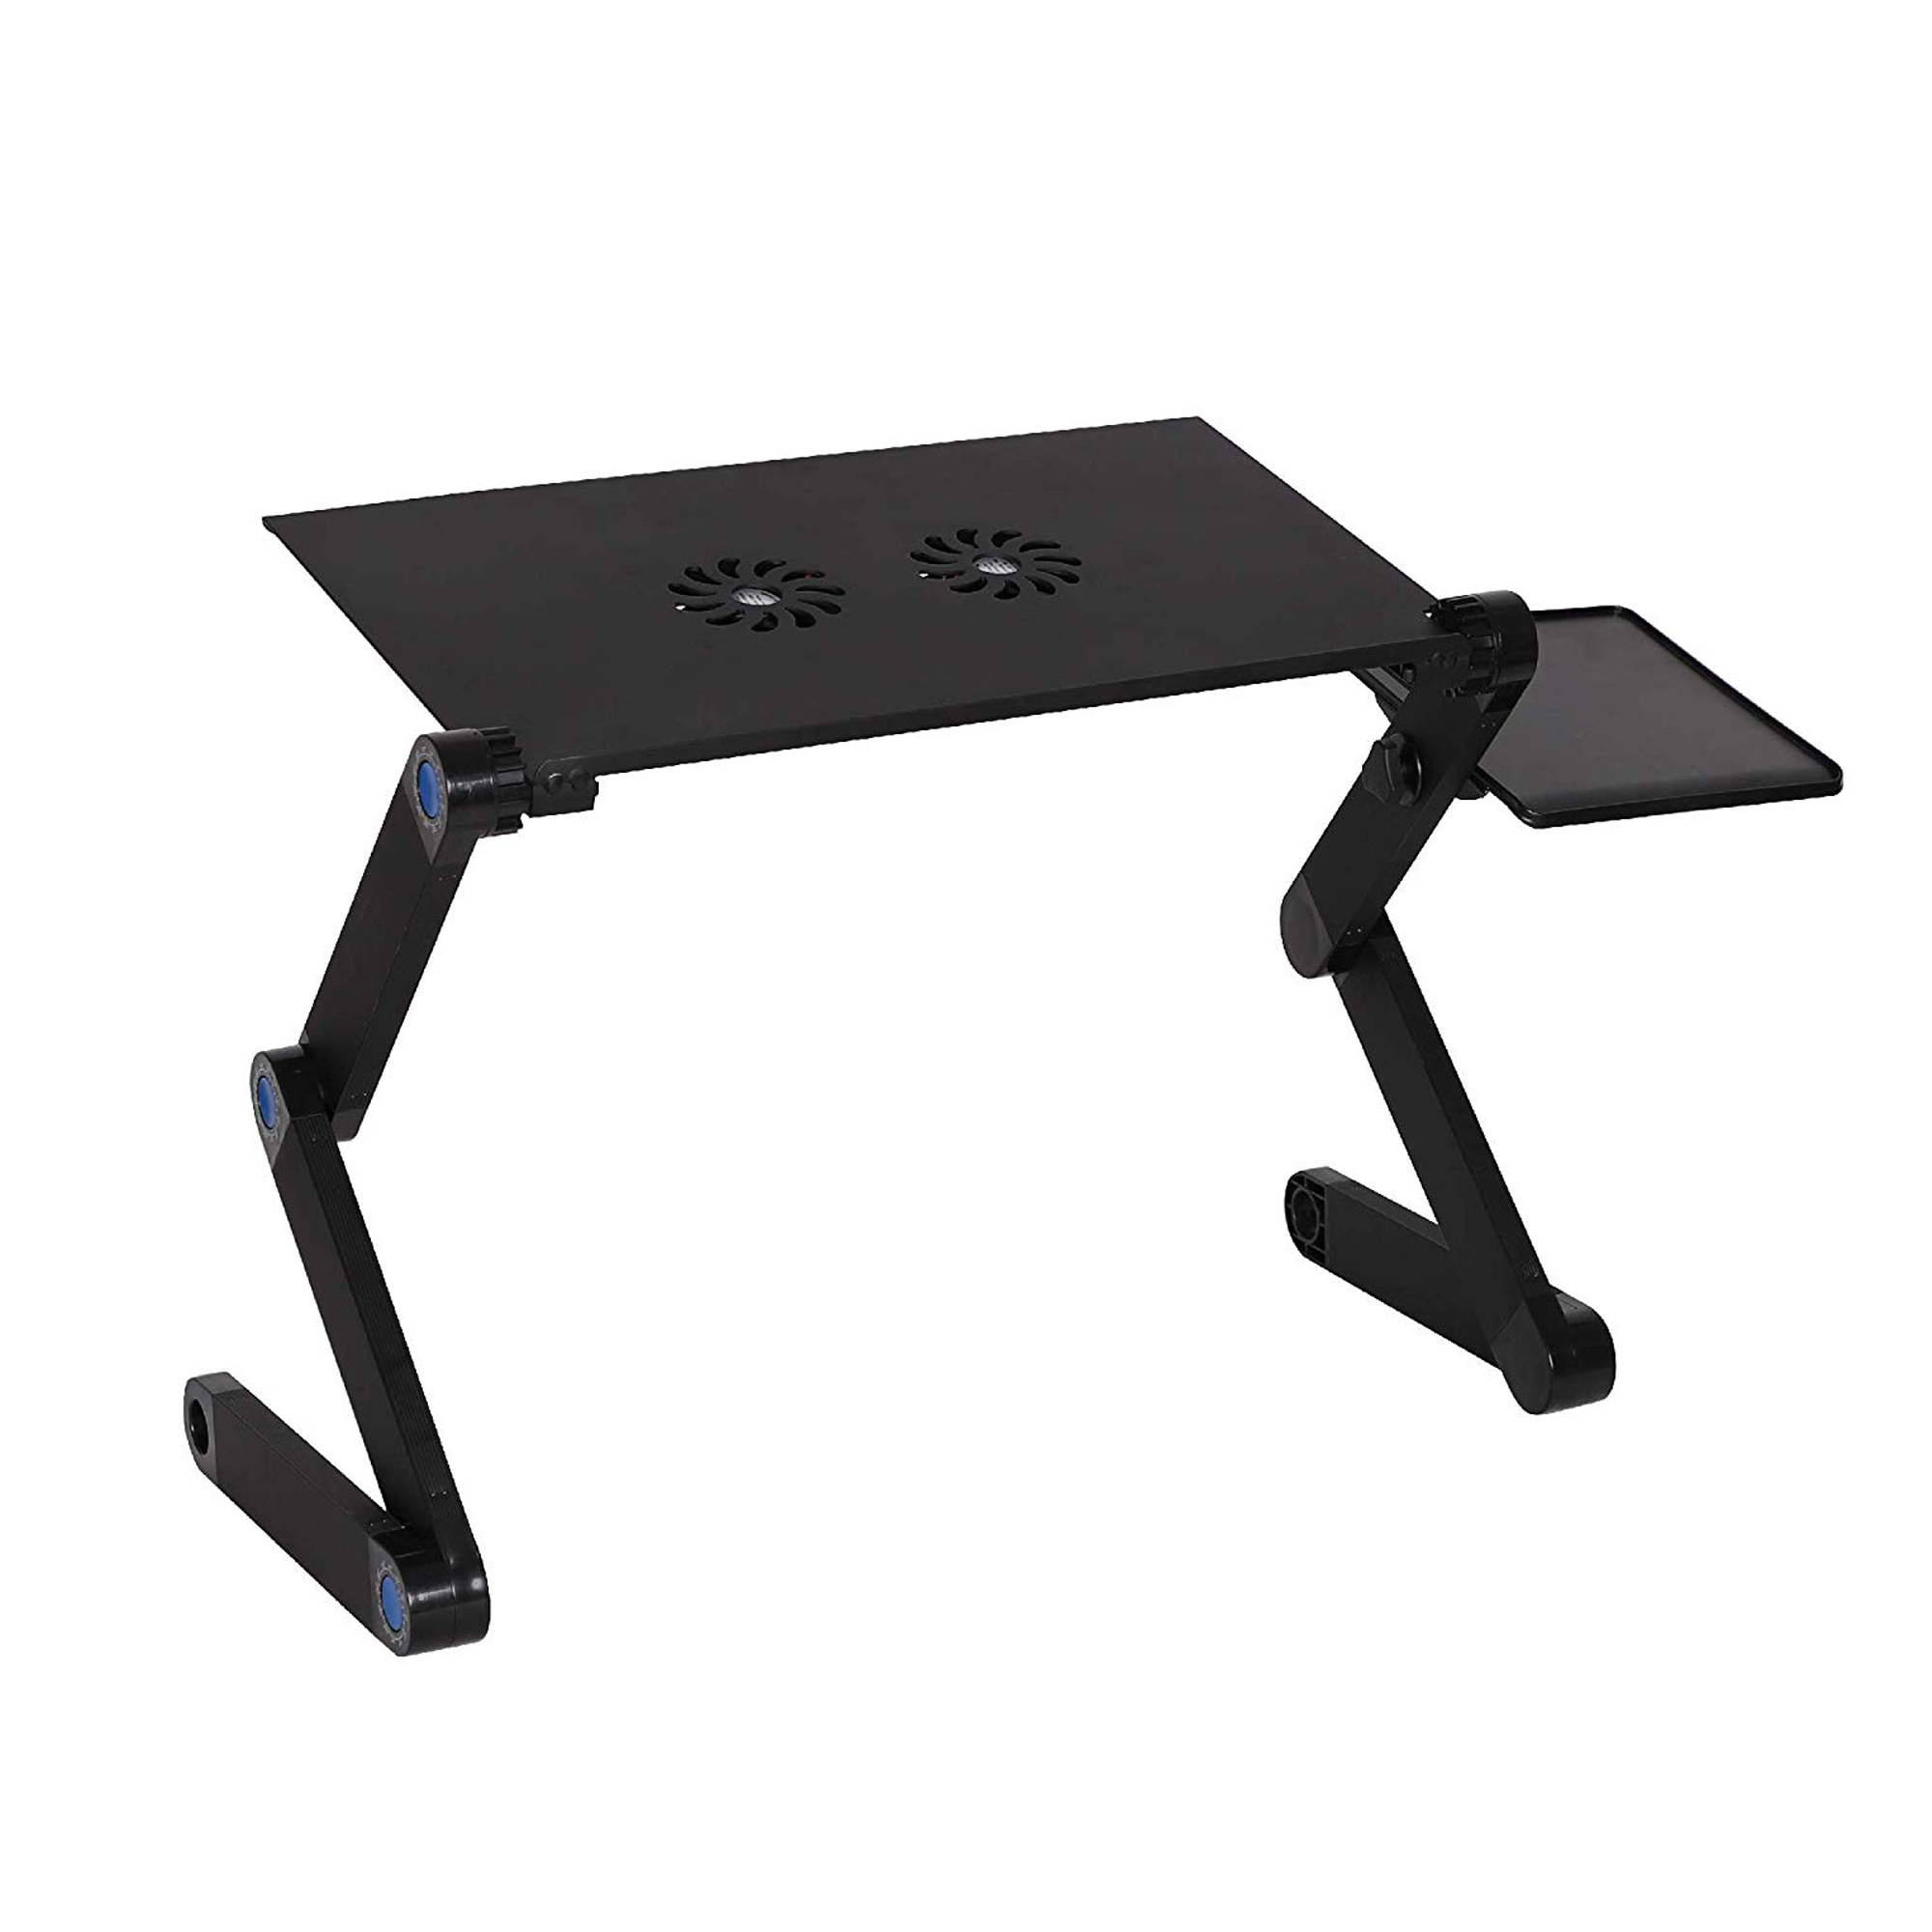 KARMAS PRODUCT Foldable Aluminum Laptop Desk Adjustable Portable Laptop Table Stand with 2 CPU Cooling Fans and Mouse Pad Ergonomic Lap Desk for Bed and Sofa Up to 17 inches - image 1 of 5